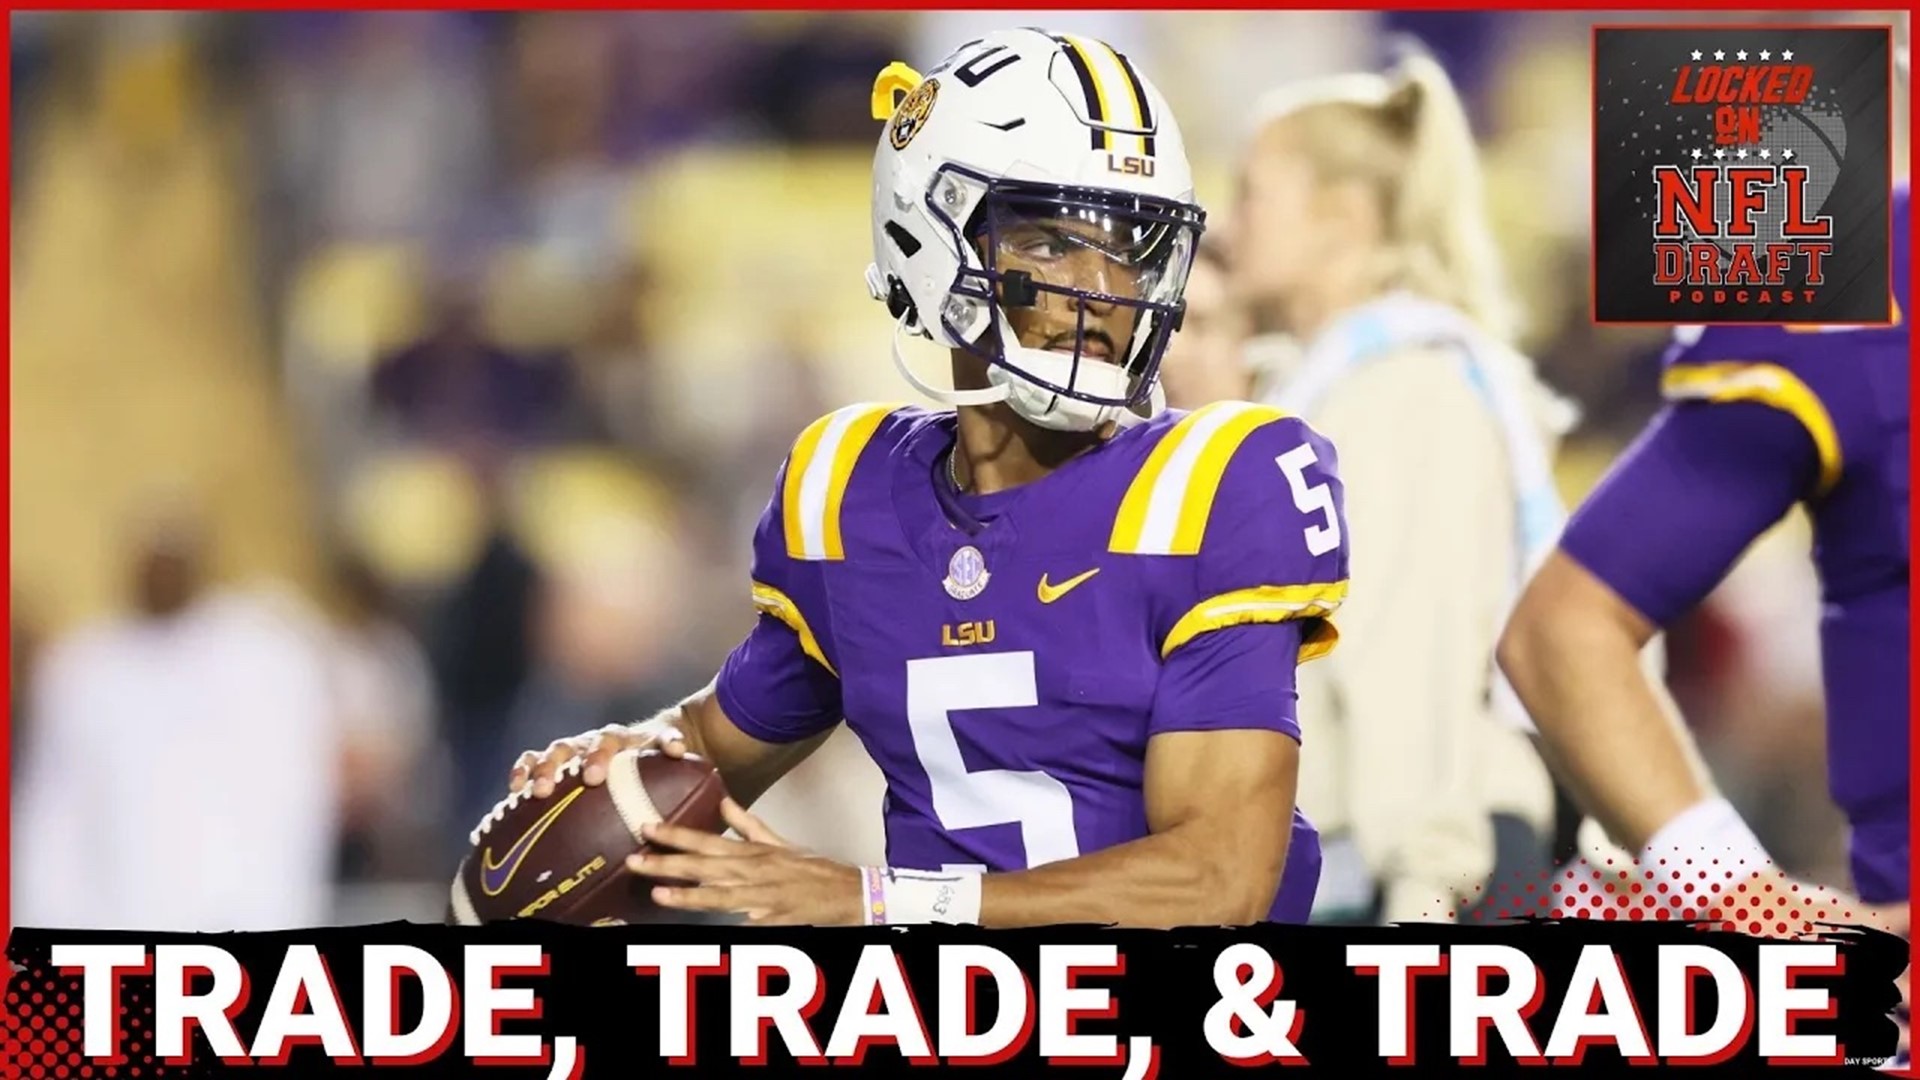 DP's post-Superbowl mock draft is here. 4 QBs come off the board within the first 5 picks with two teams trading up. How did Keith react to this?